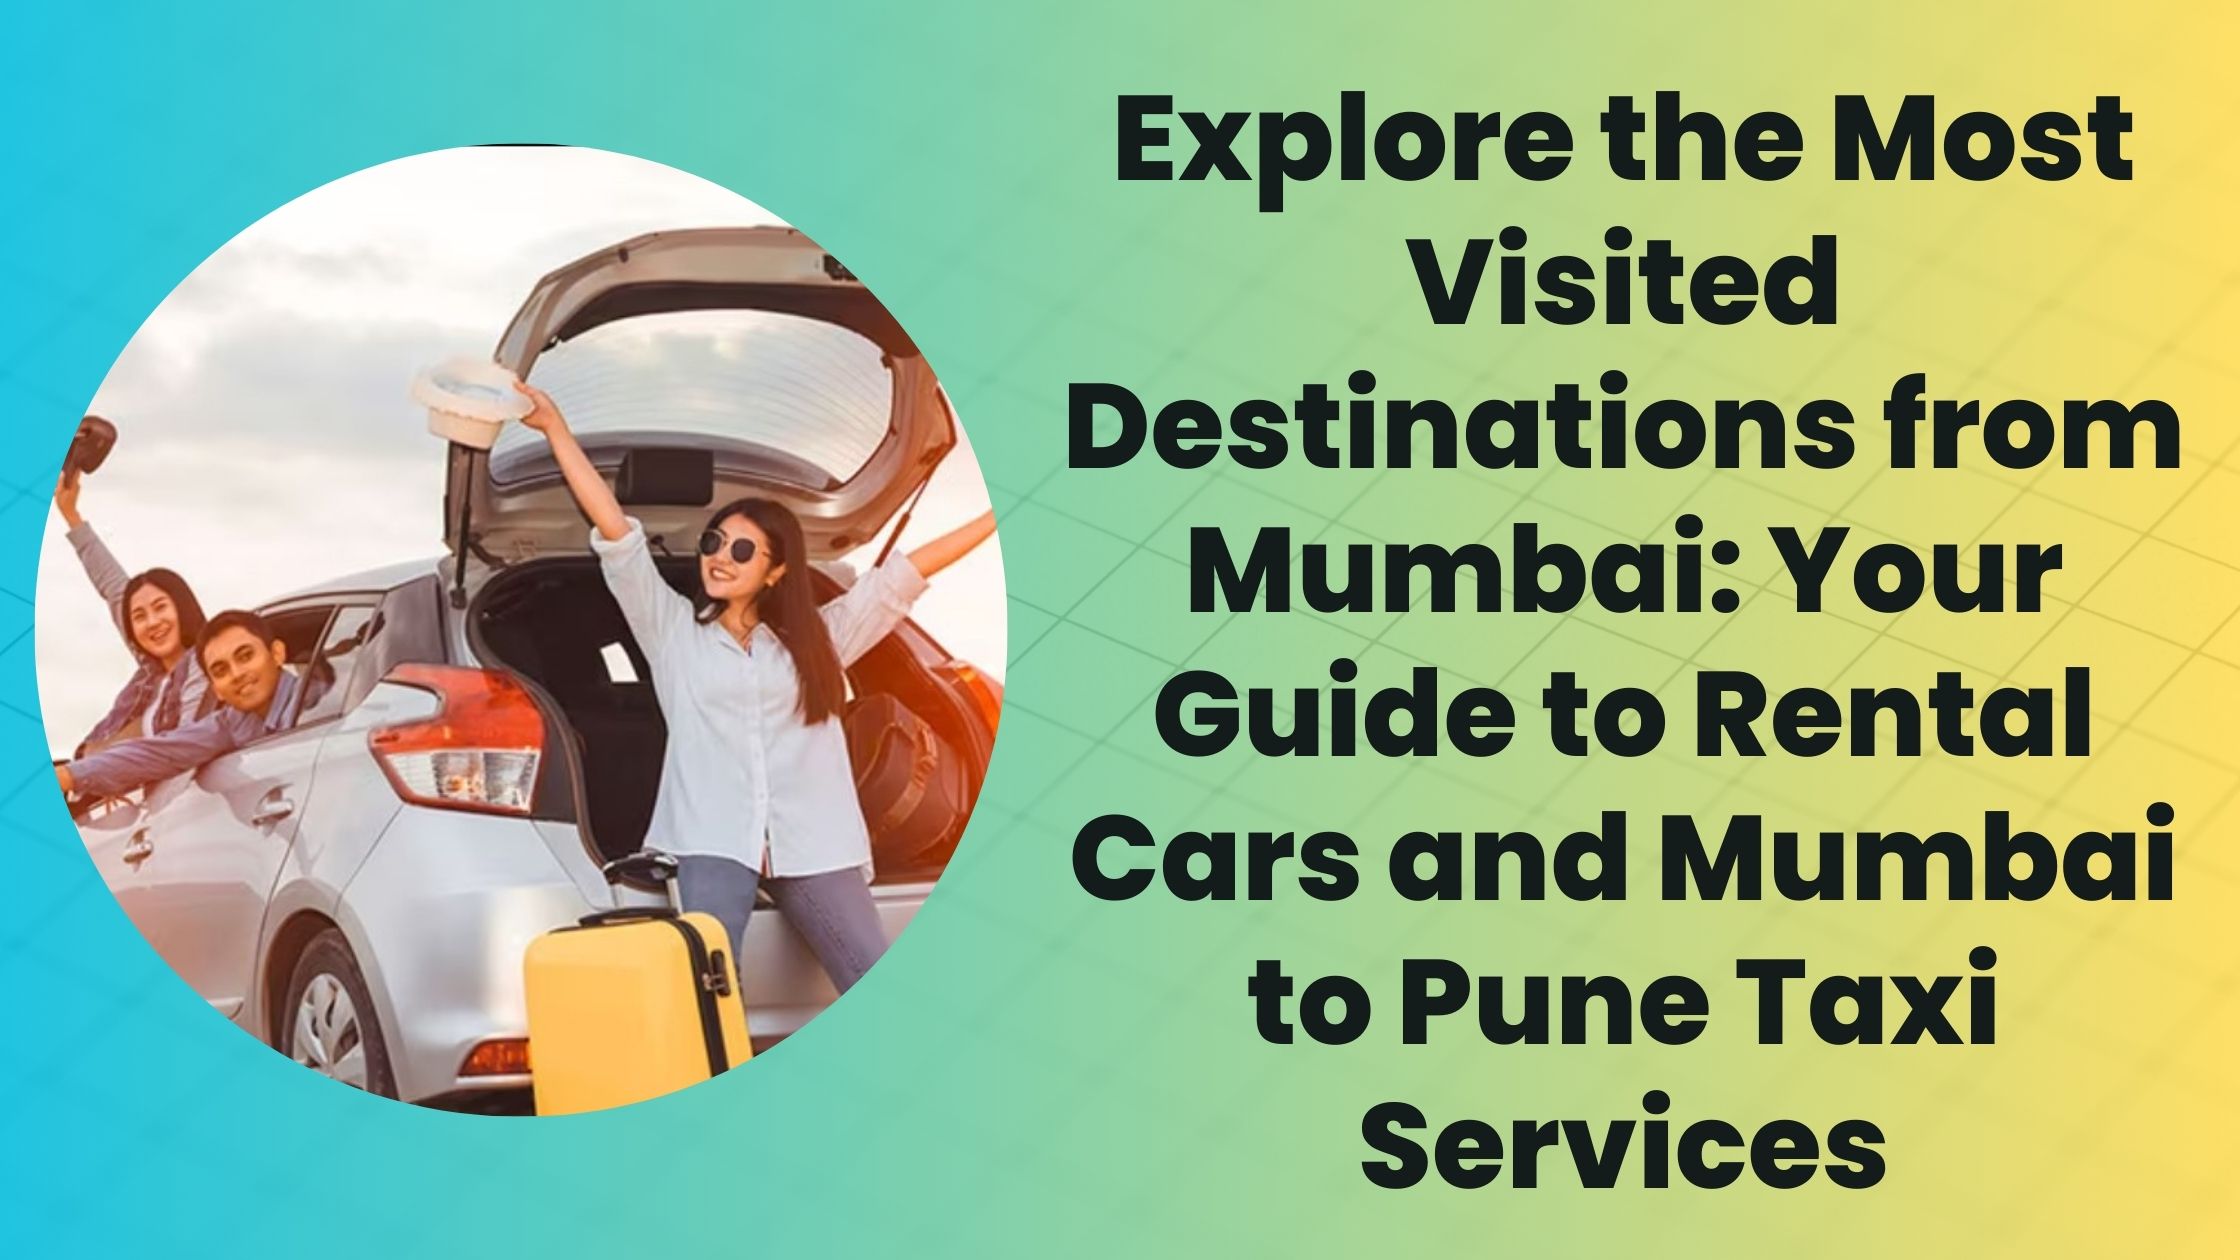 Explore the Most Visited Destinations from Mumbai: Your Guide to Rental Cars and Mumbai to Pune Taxi Services